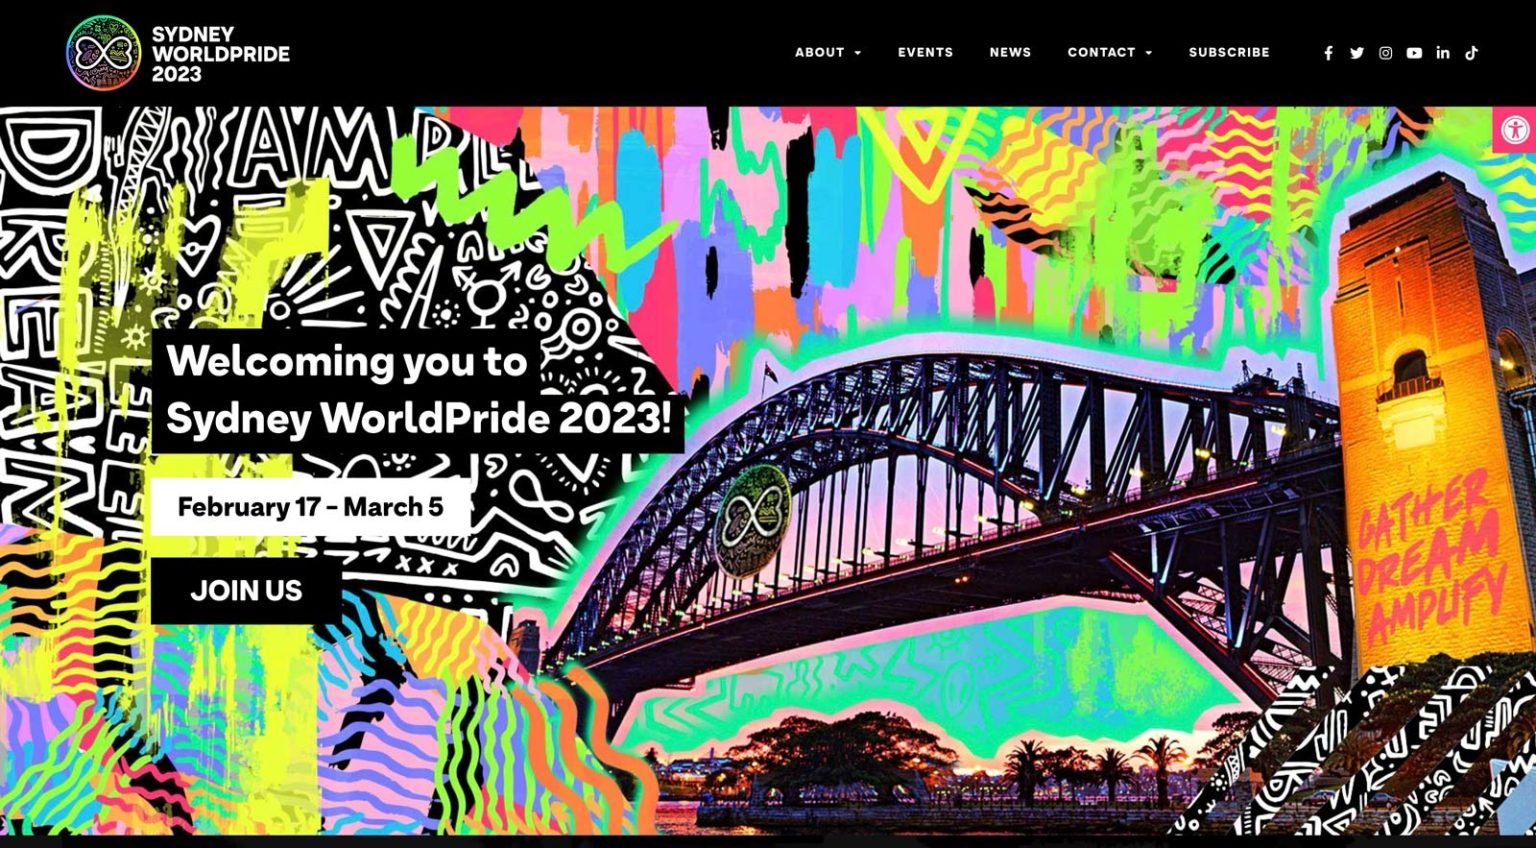 A vibrant promotional image for Sydney WorldPride 2023, featuring colorful abstract designs, the Sydney Harbour Bridge, and event details: February 17 - March 5. Text reads "Welcoming you to Sydney WorldPride 2023!.